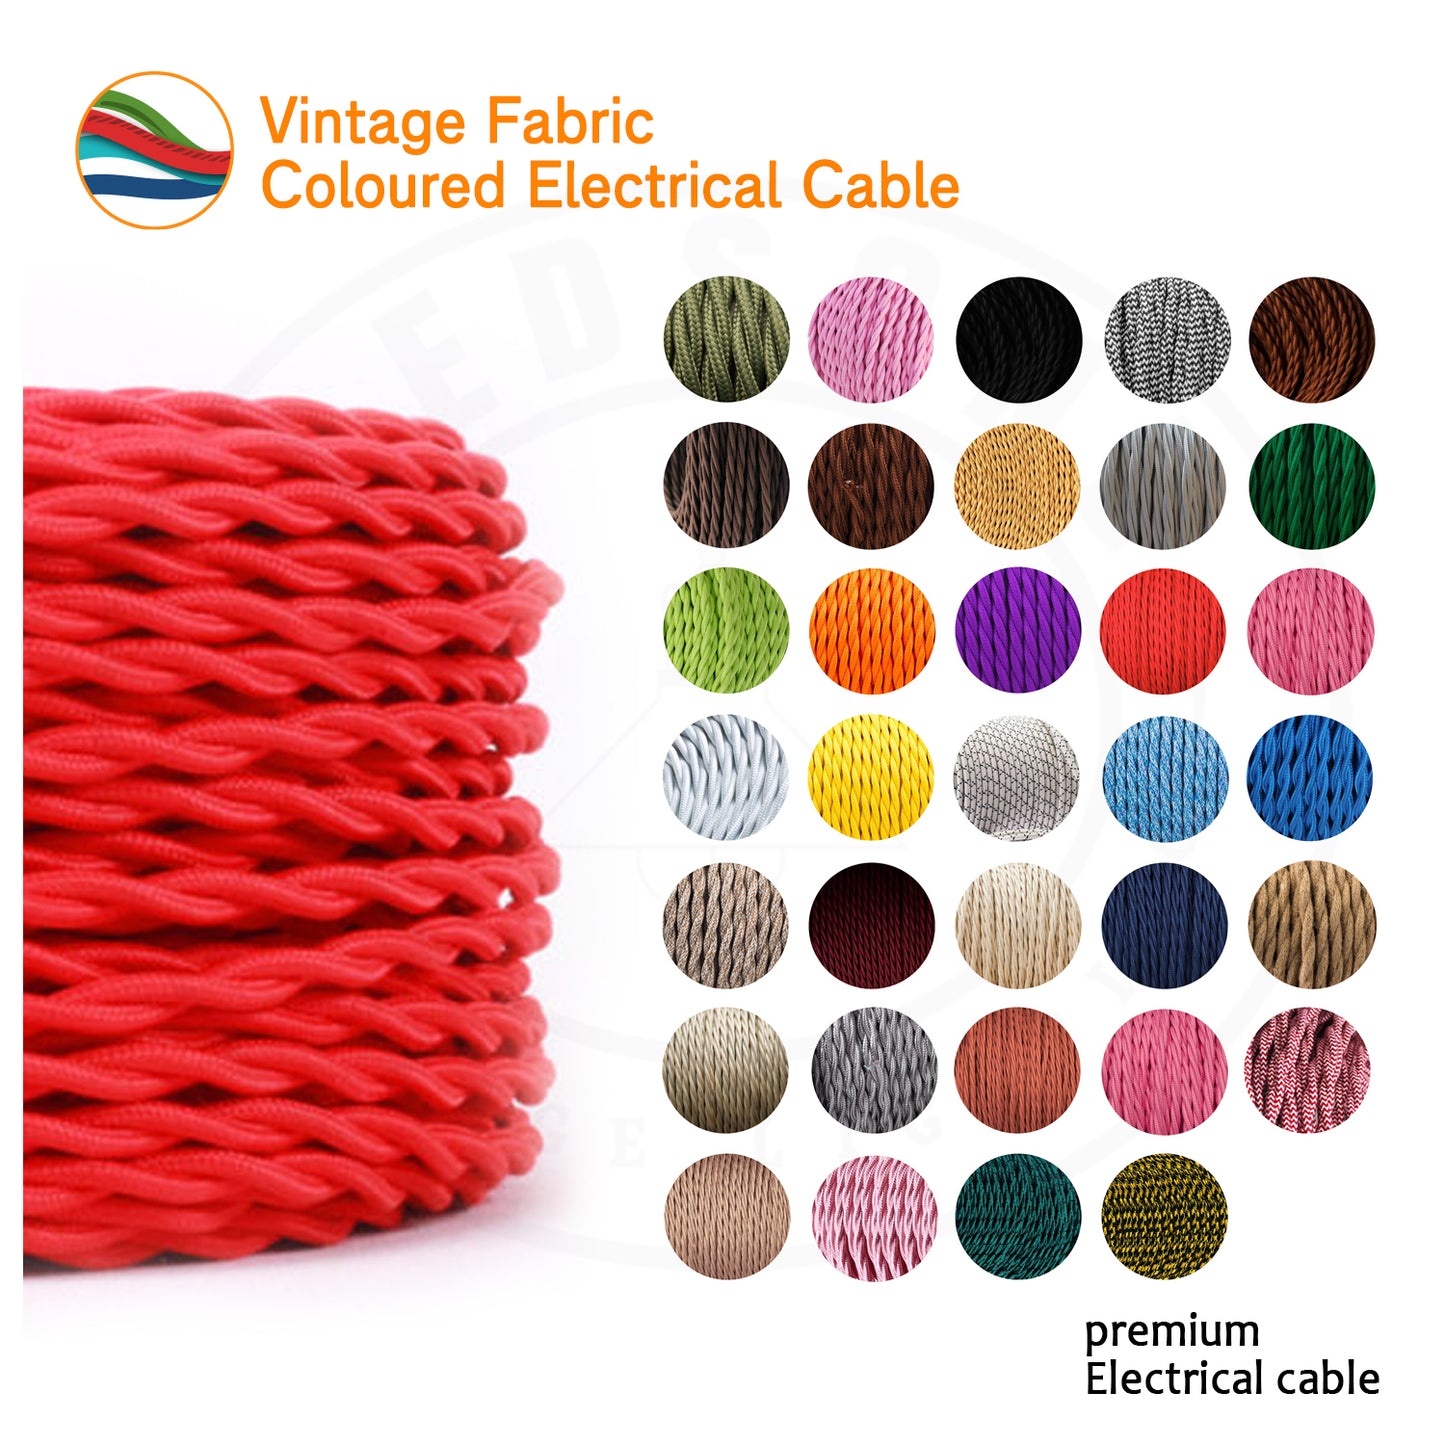 Vintage 3 core Twisted Braided Cable Electrical Fabric Flexible